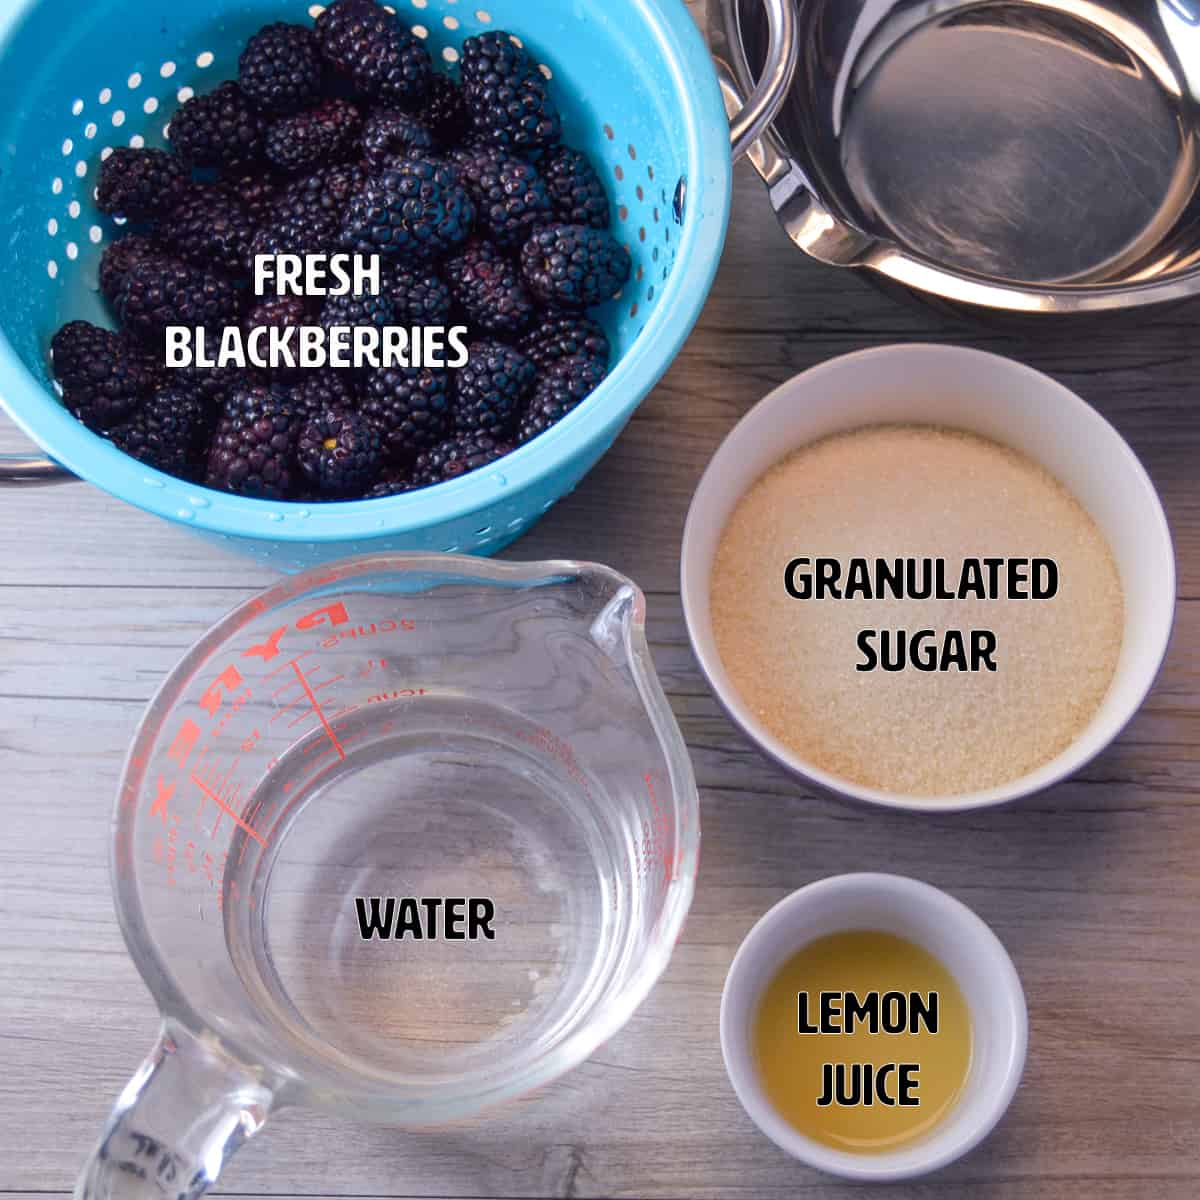 Ingredients for Blackberry Simple Syrup on Counter: fresh blackberries, water, granulated sugar & Lemon juice. Saucepan with pour spout on upper right